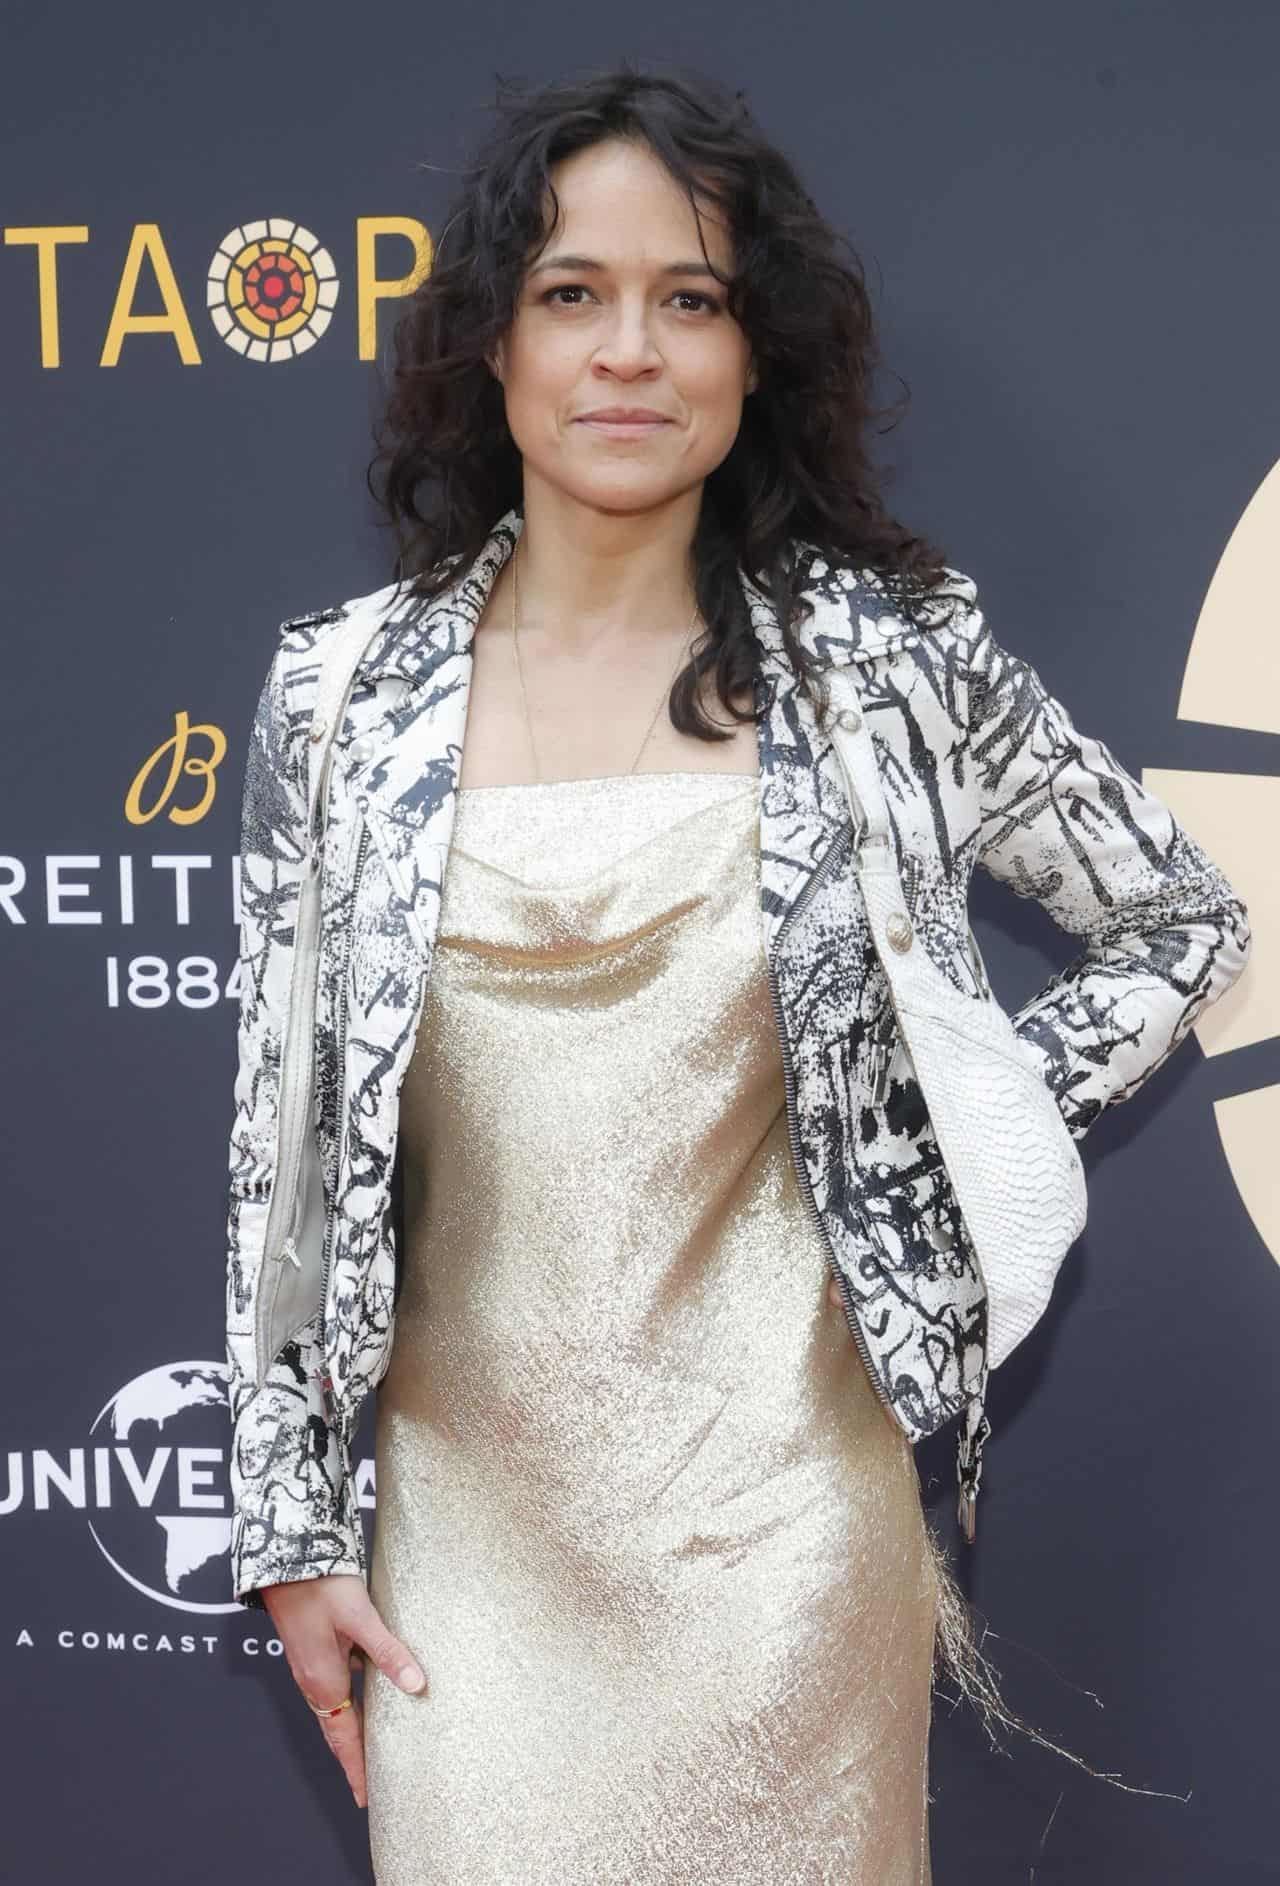 Michelle Rodriguez Rocks the Red Carpet in a Gold Dress and Leather Jacket